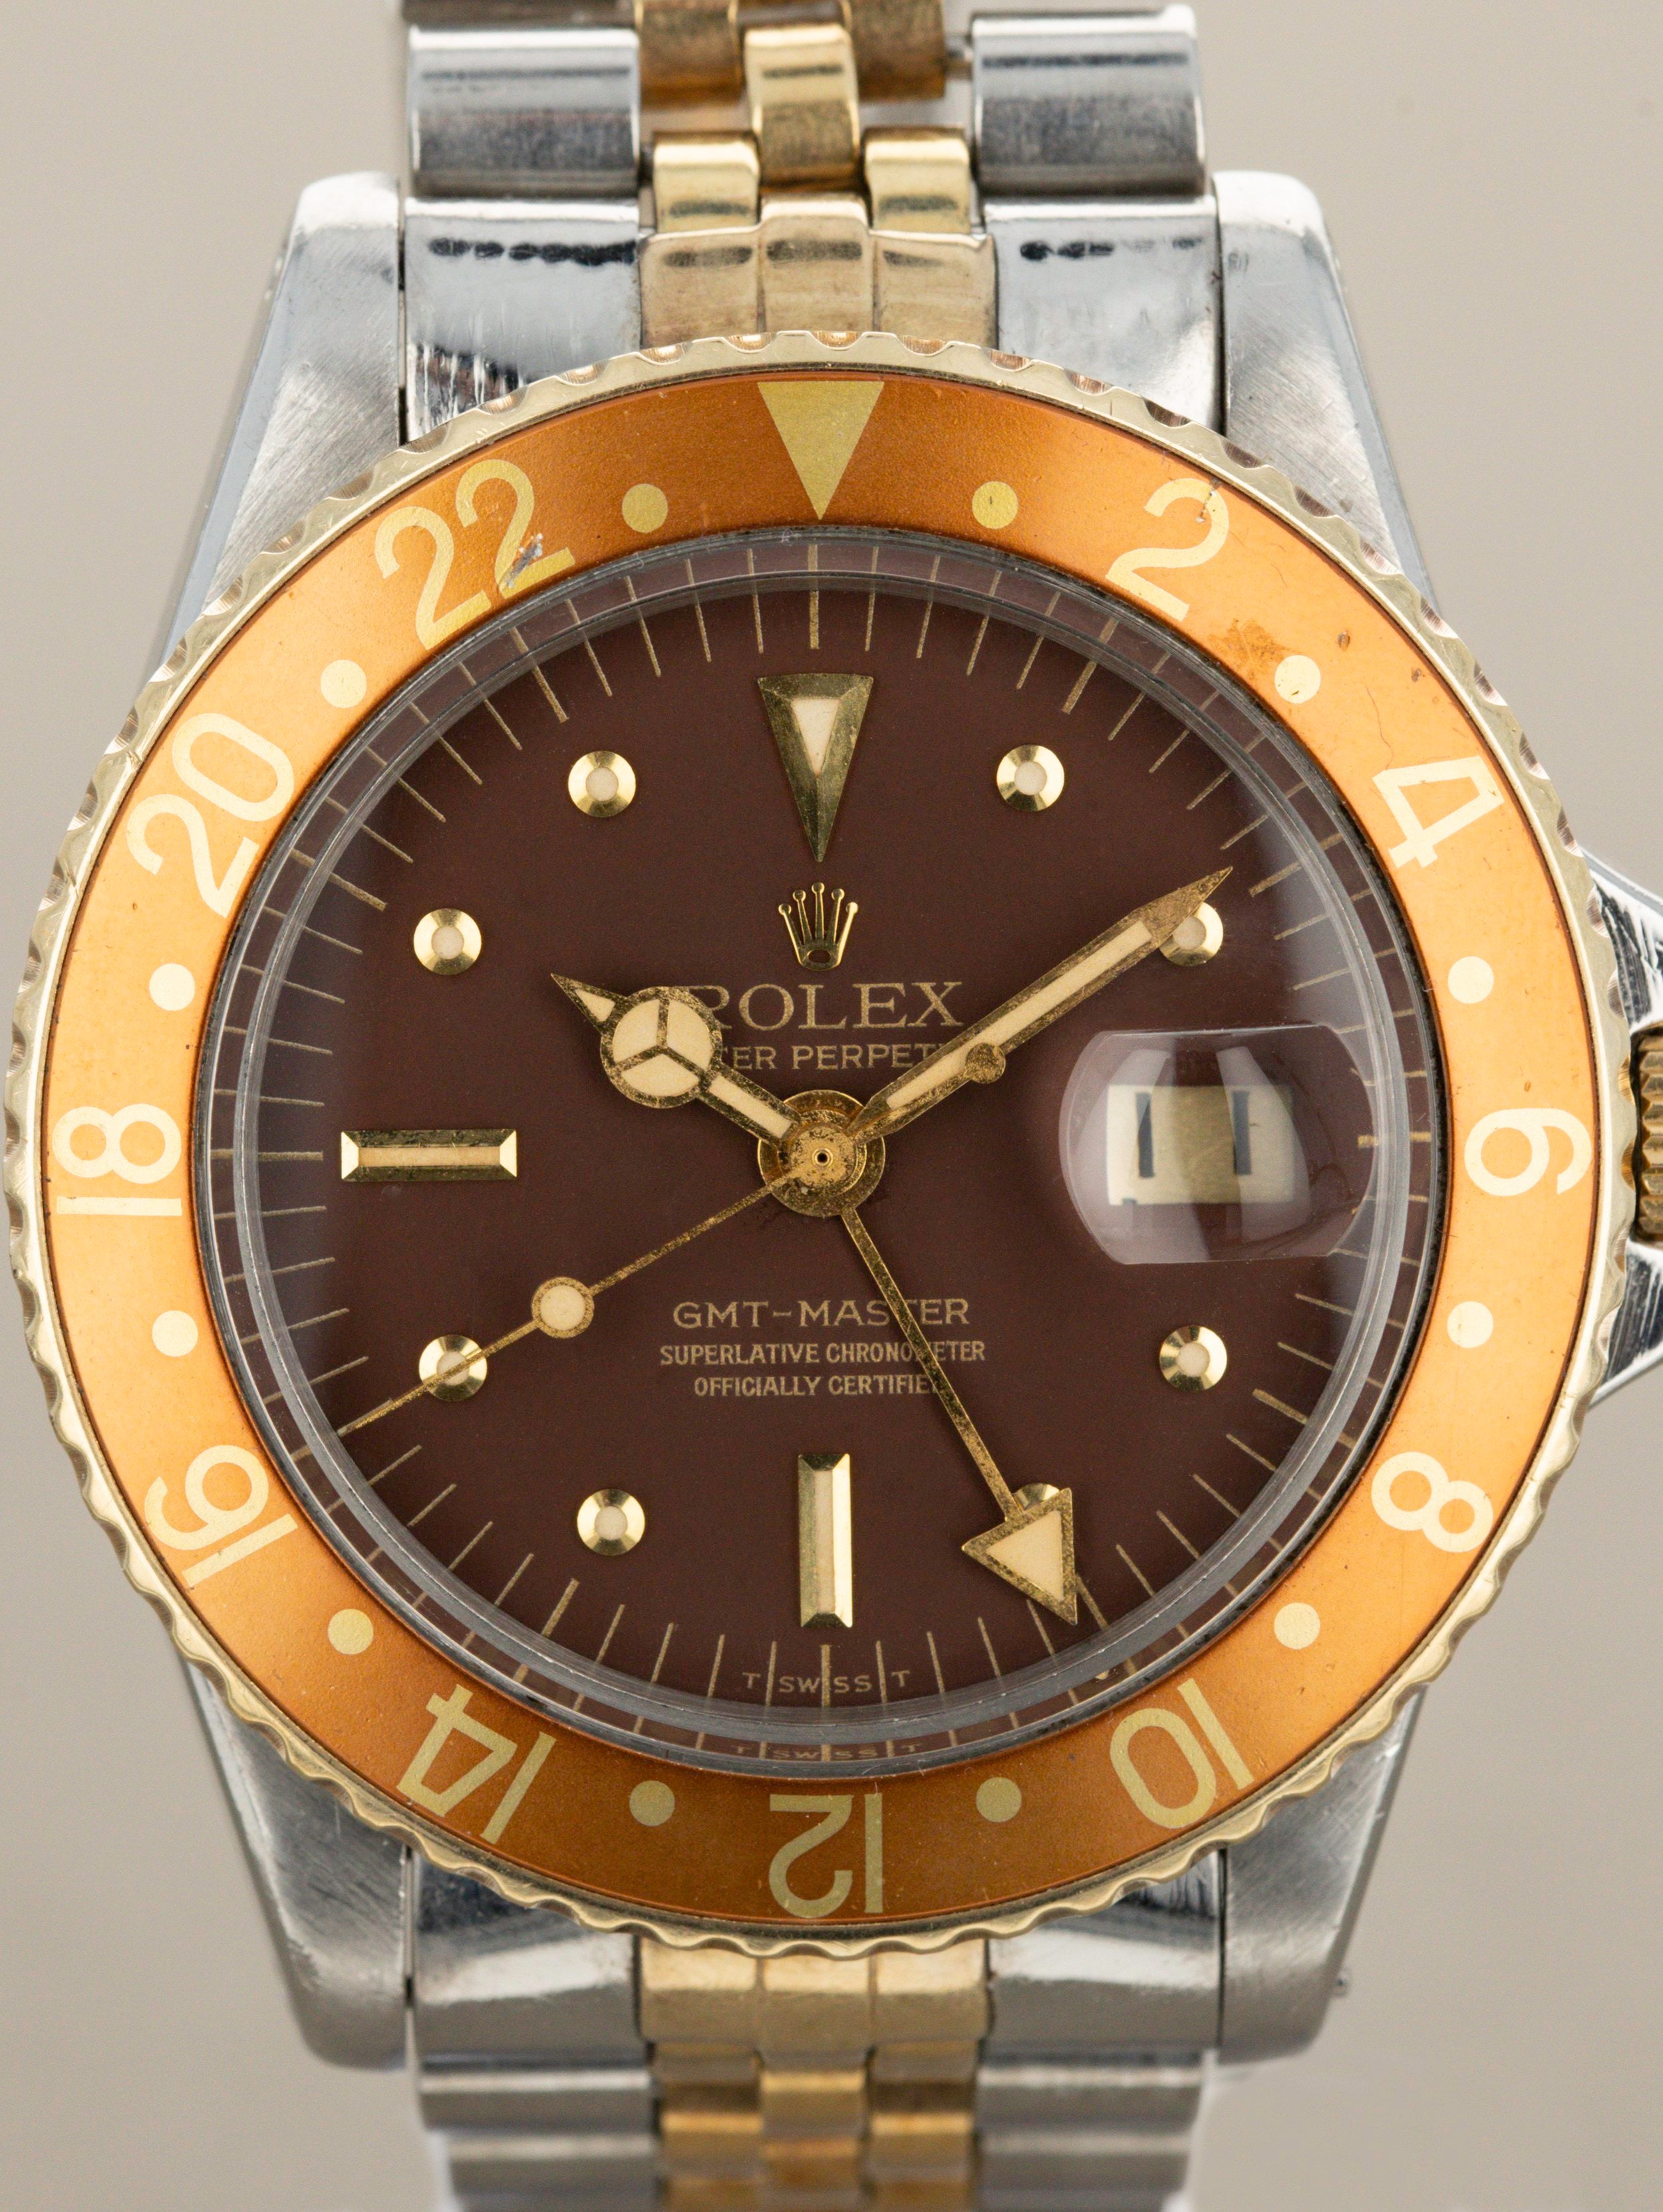 Rolex GMT-Master Ref. 1675/3 - Rootbeer Nipple Dial